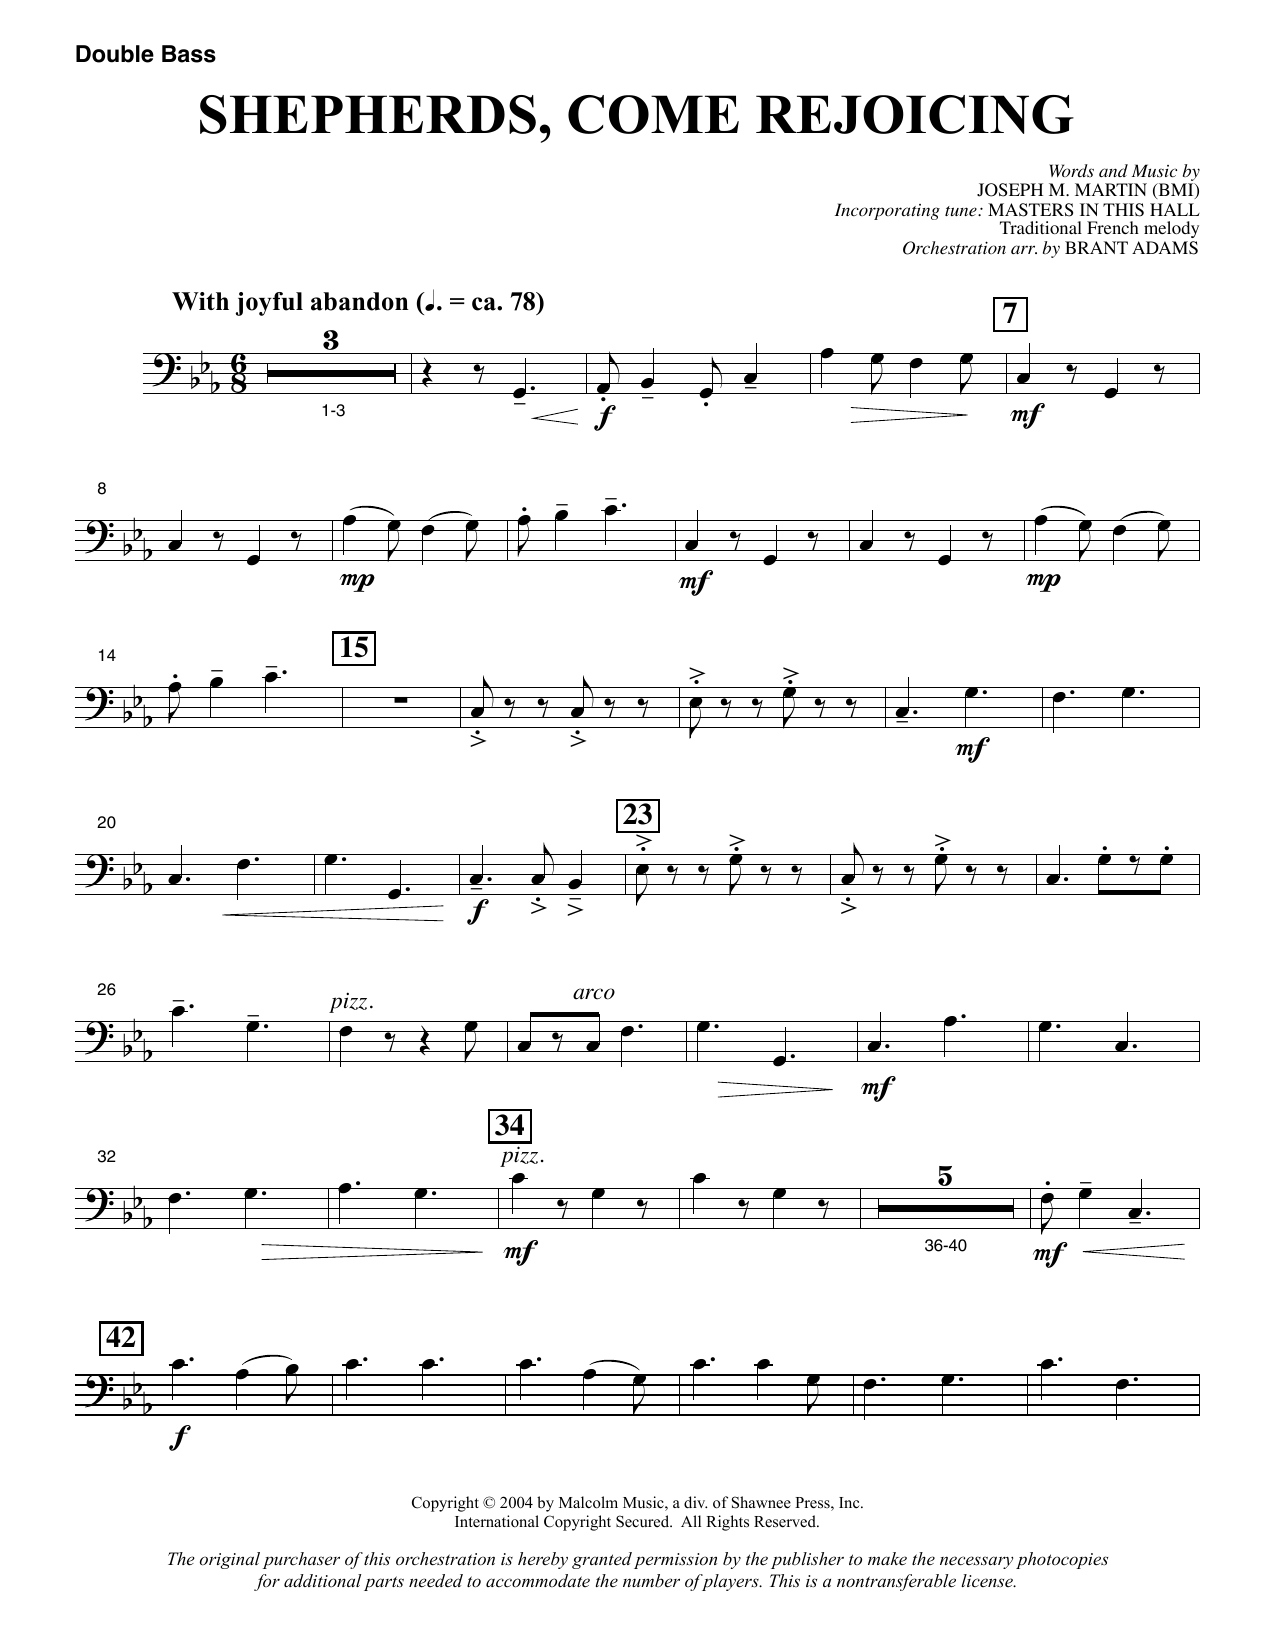 Joseph M. Martin Shepherds, Come Rejoicing (from Voices Of Christmas) - Double Bass sheet music notes and chords. Download Printable PDF.